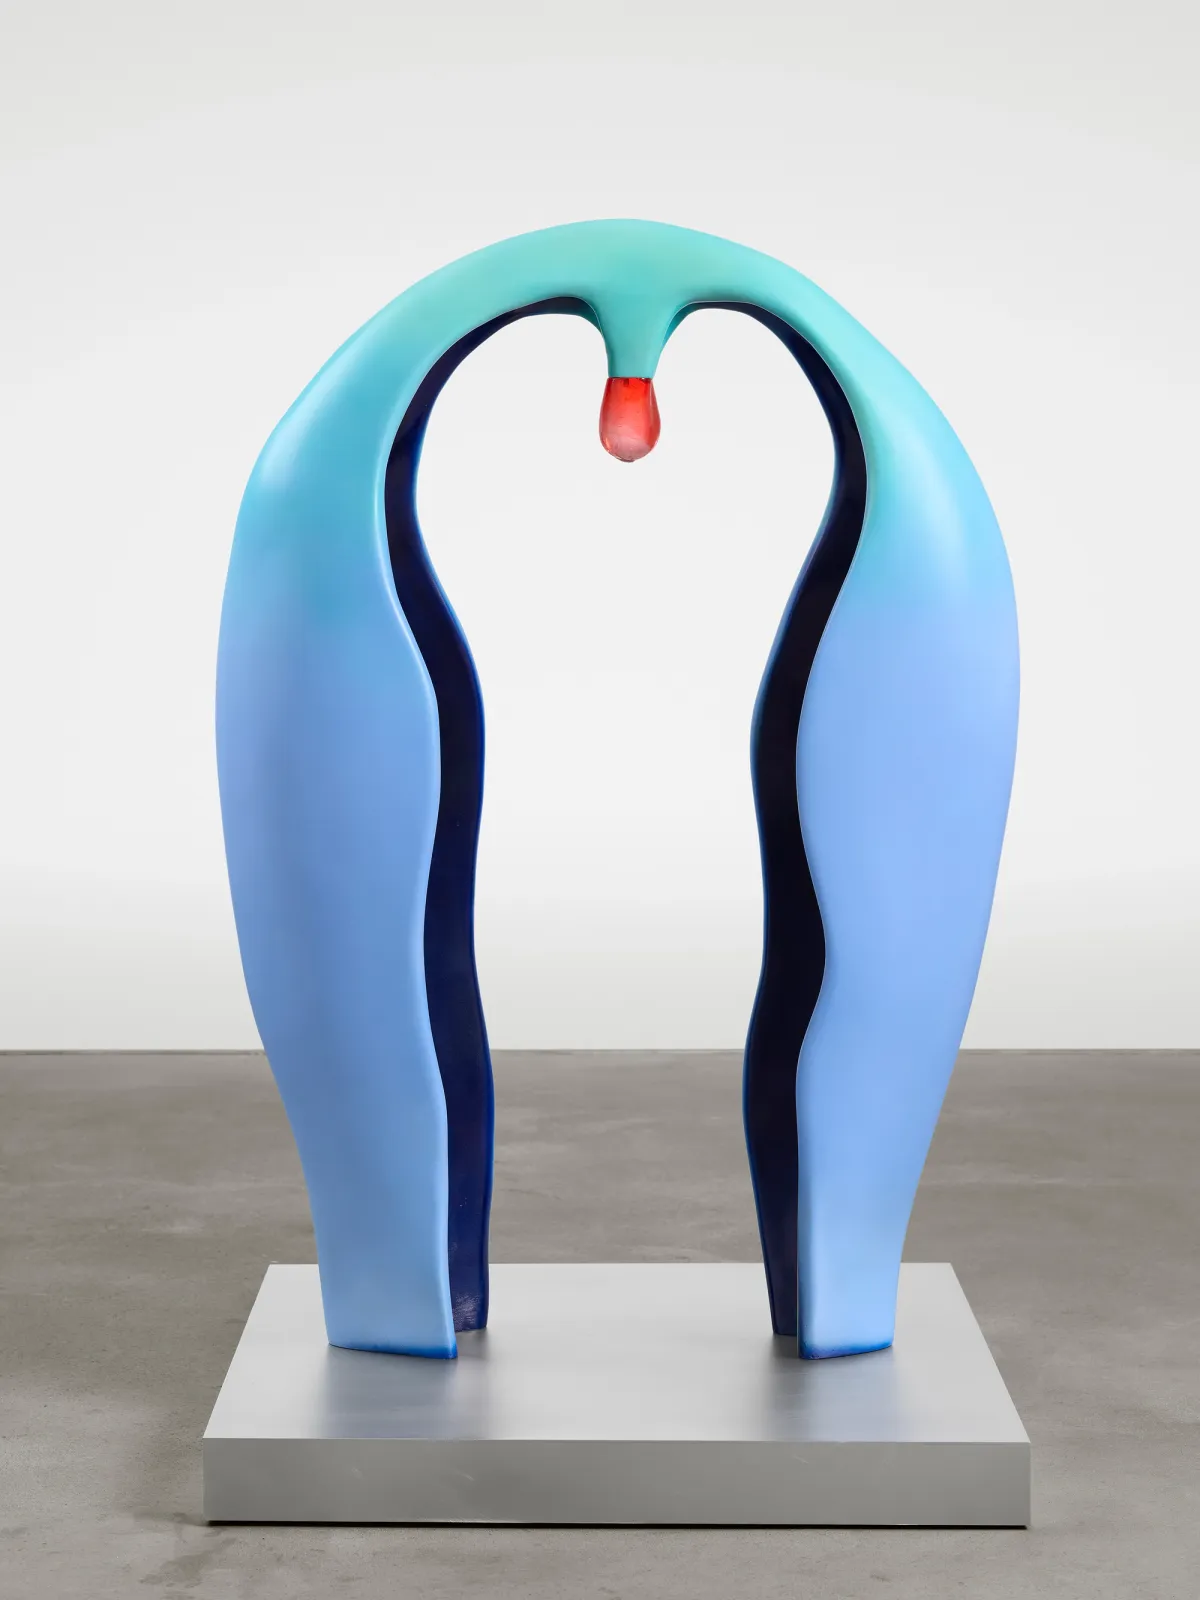 An azure, horseshoe-shaped sculpture with a red drop in the center, made of polymer, steel, and acrylic paint, standing on a raw aluminum and mdf pedestal.